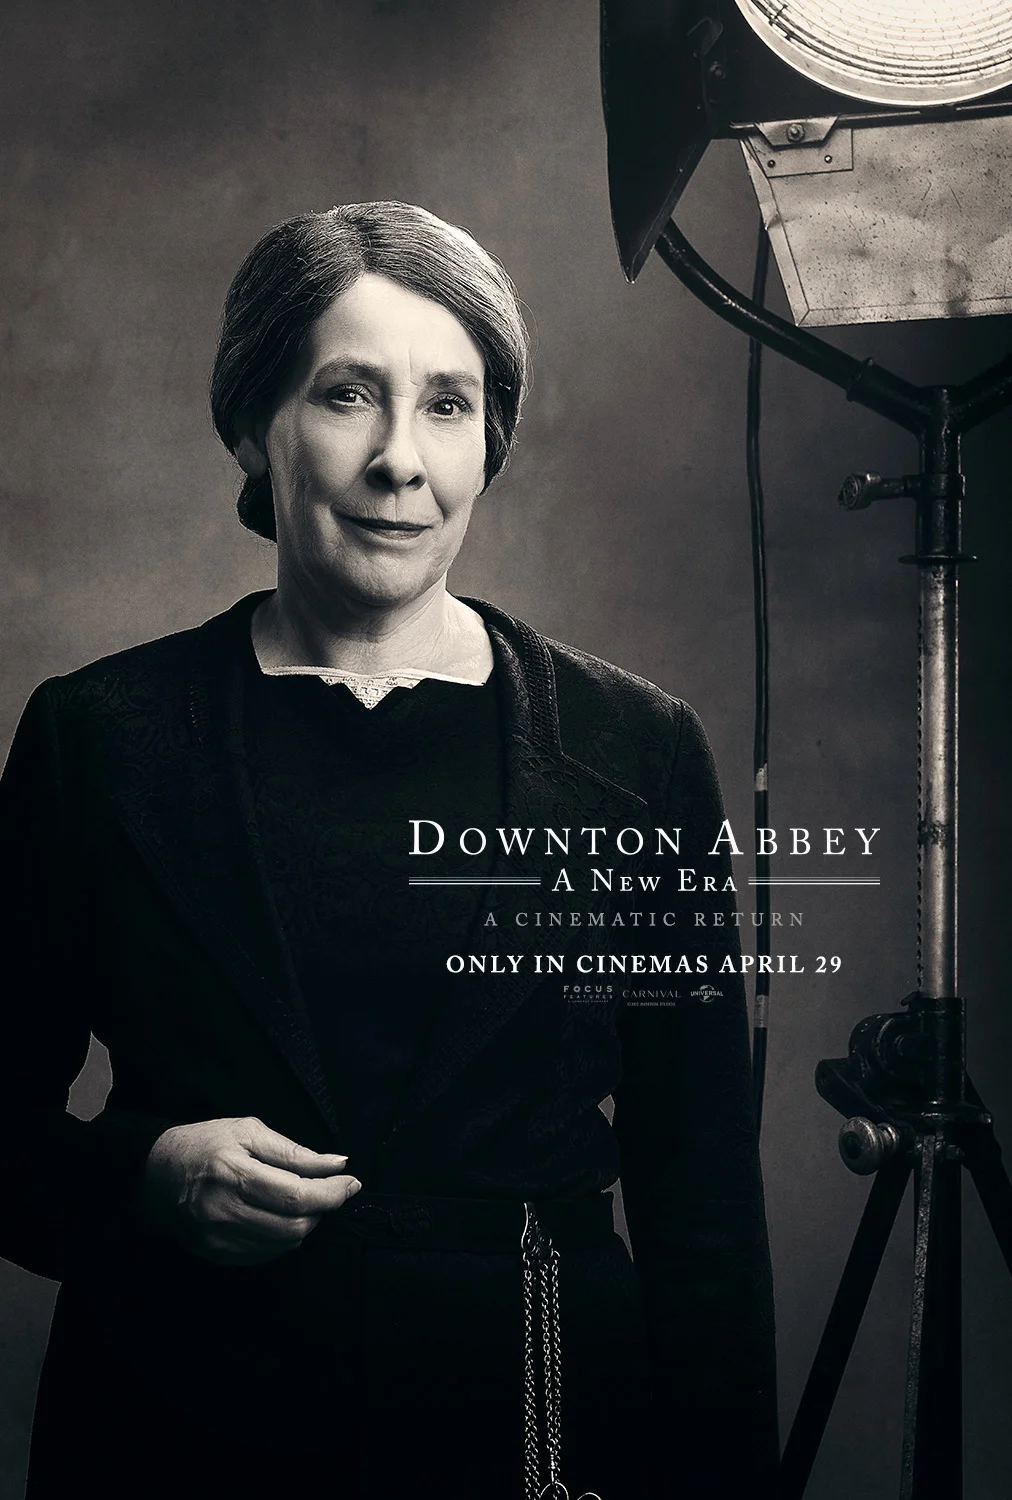 downton-abbey-a-new-era-released-character-posters-multiple-main-actors-appear-14